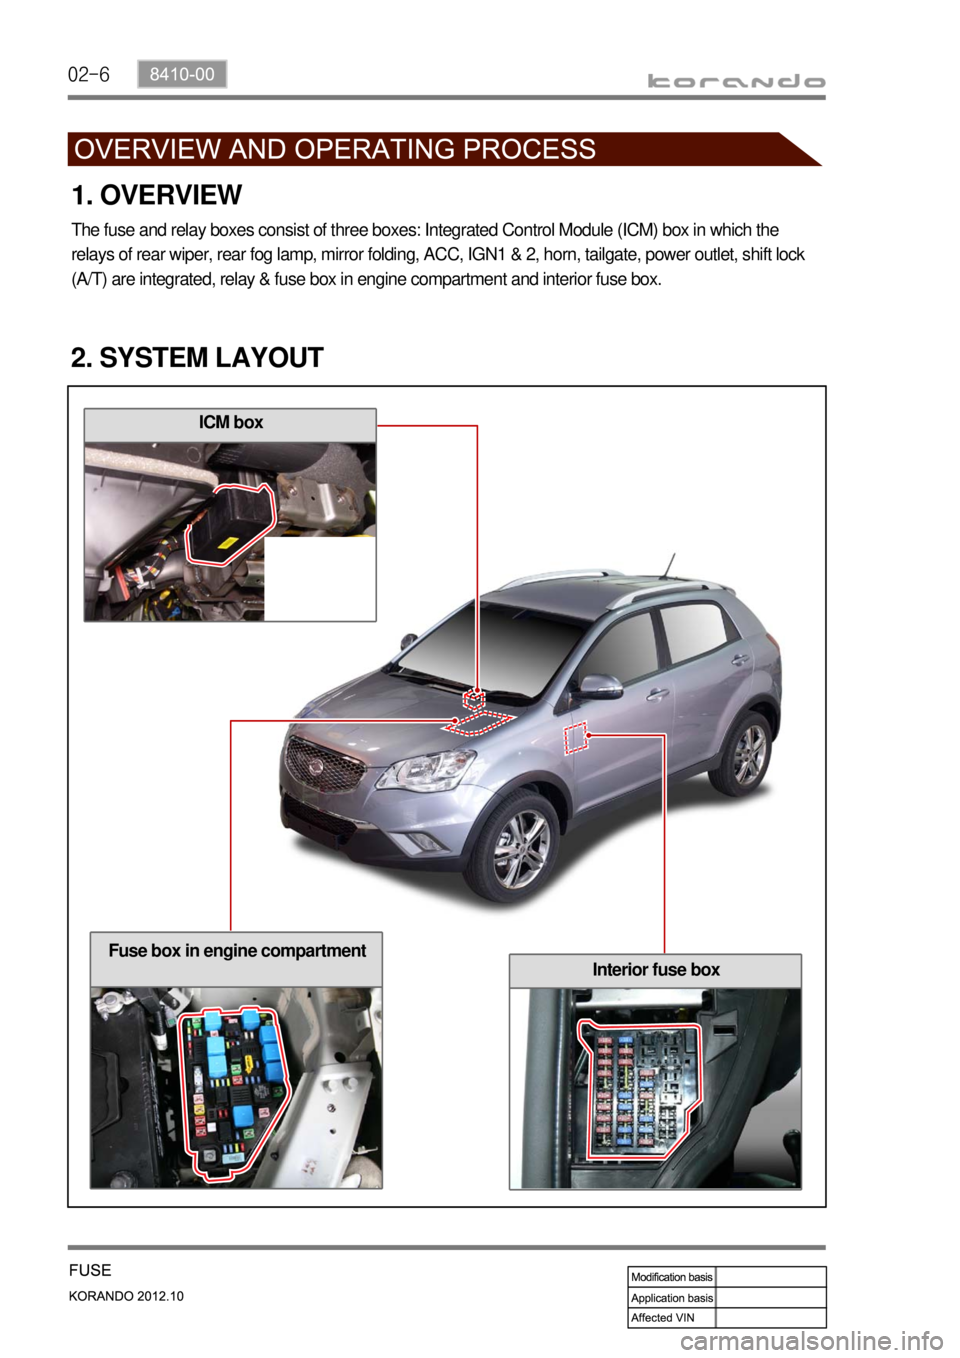 SSANGYONG KORANDO 2012  Service Manual 02-6
ICM box
Interior fuse box
Fuse box in engine compartment
The fuse and relay boxes consist of three boxes: Integrated Control Module (ICM) box in which the 
relays of rear wiper, rear fog lamp, mi